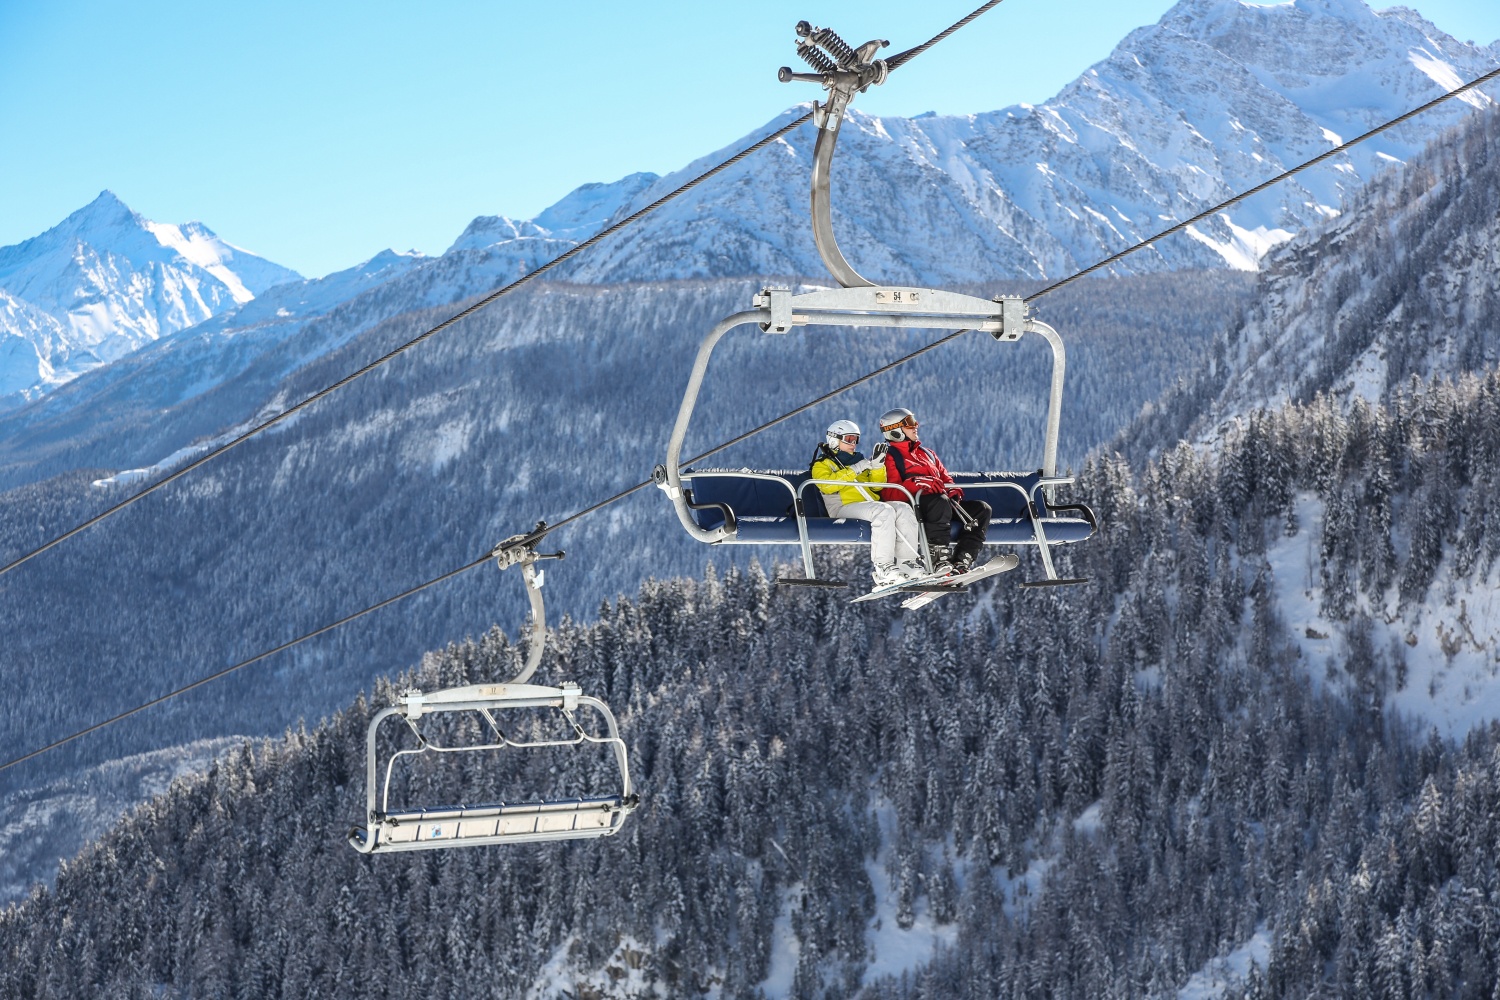 Couple sat on ski lift with mountains in background: Courmayeur, Valle d'Aosta